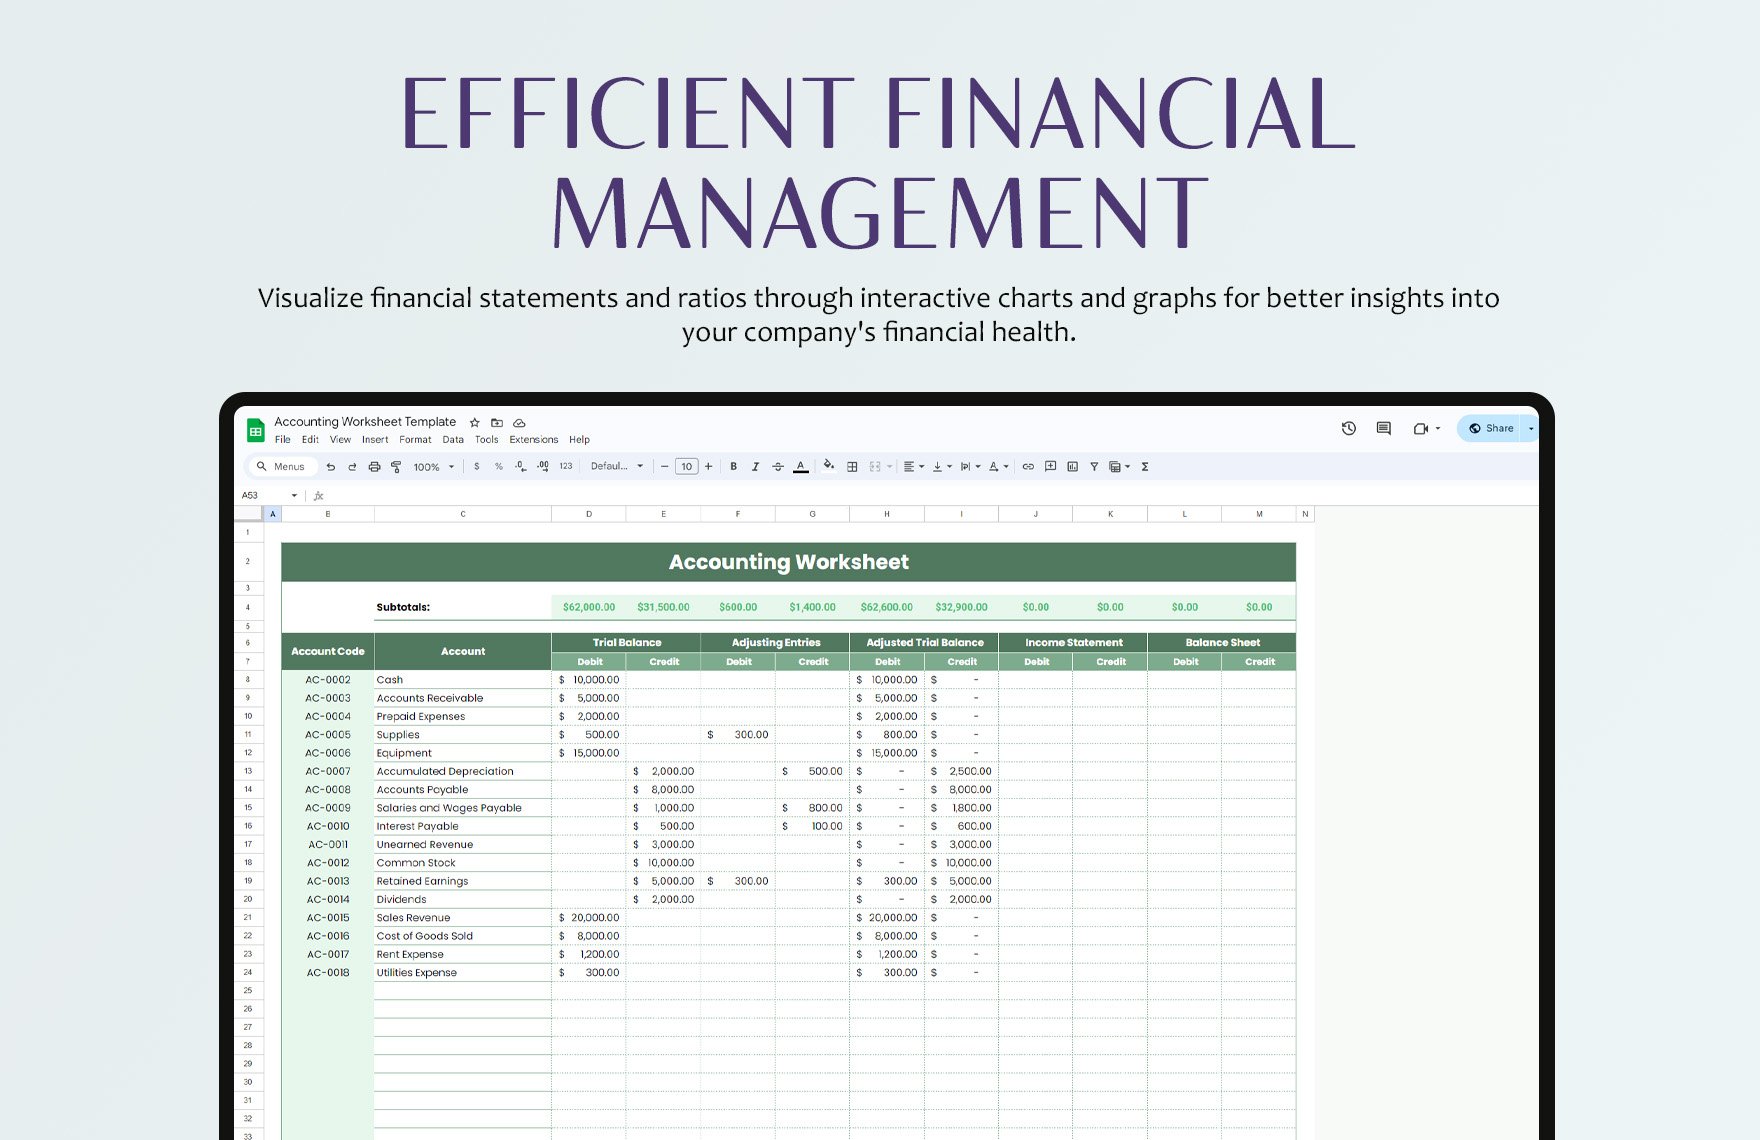 Accounting Worksheet Template